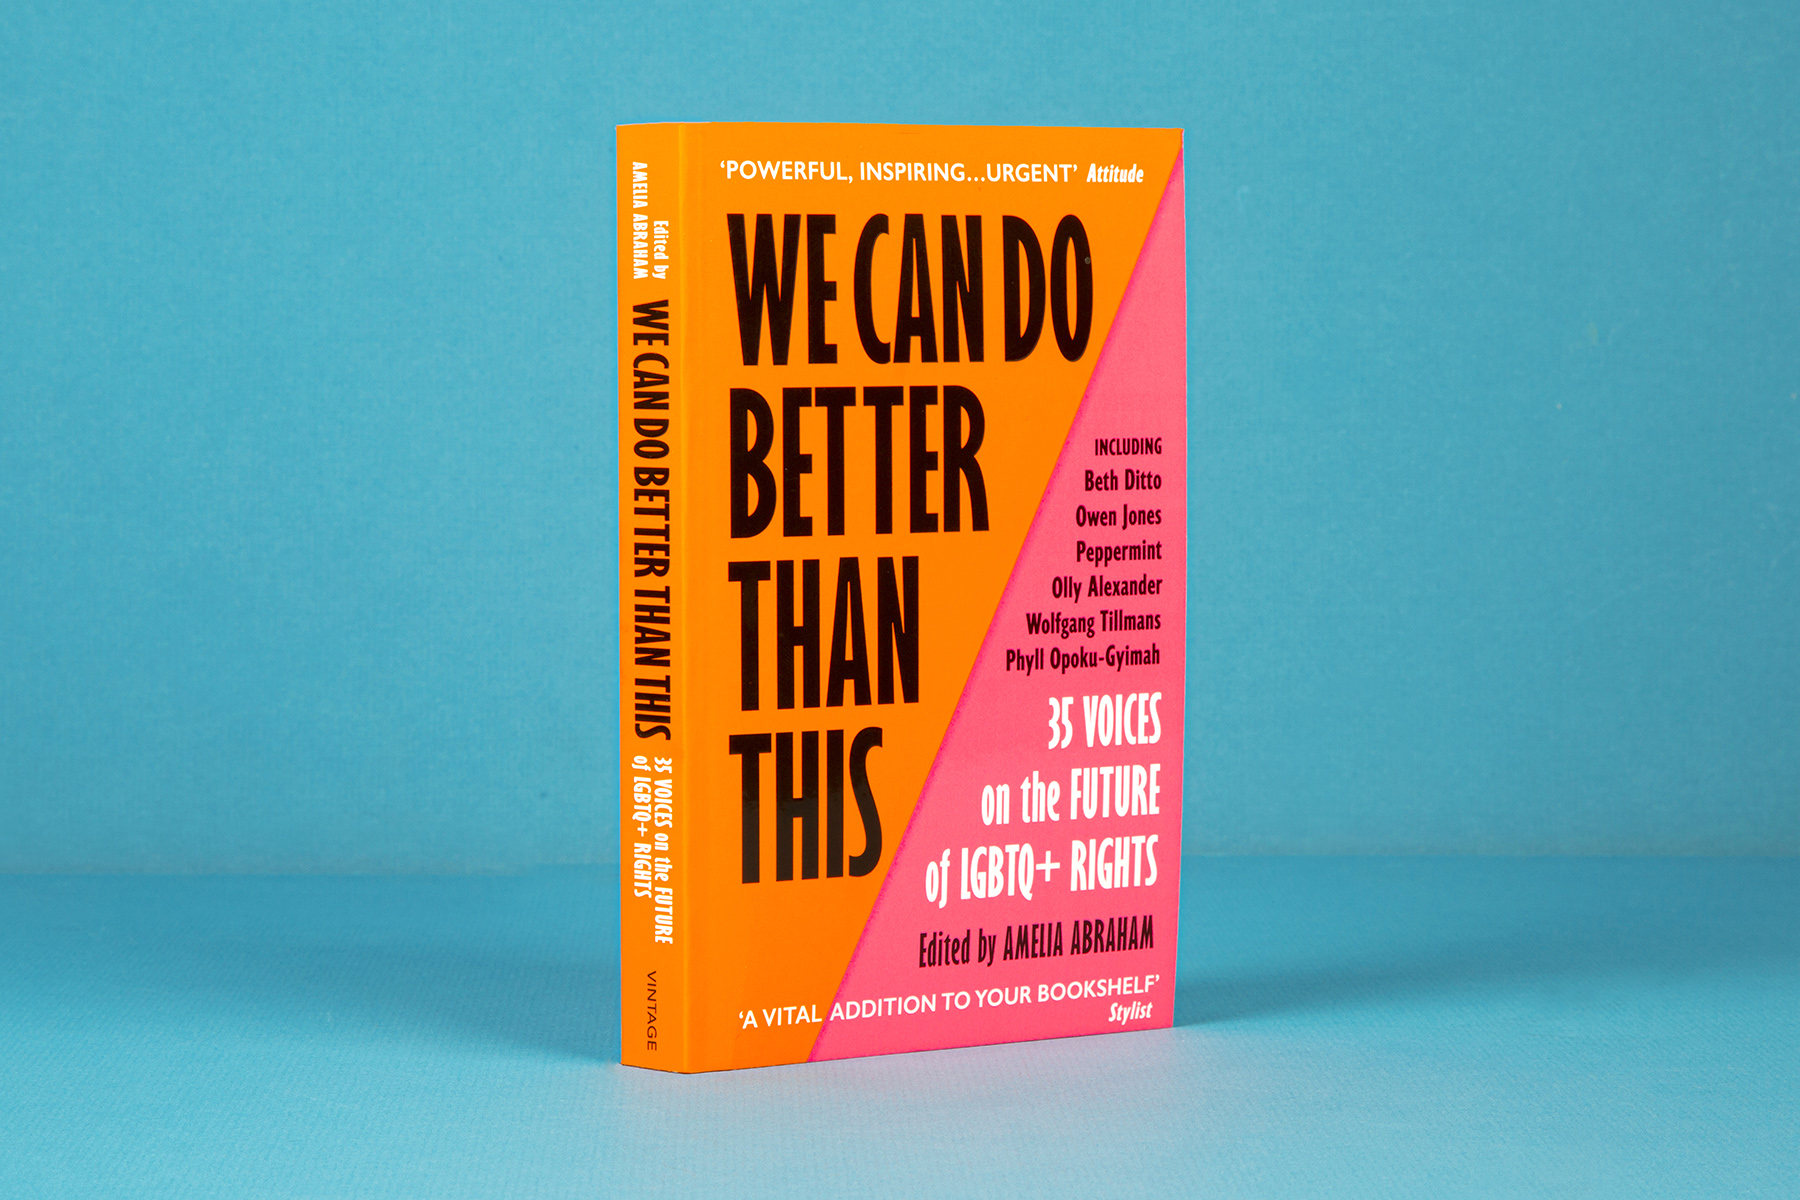 The book We Can Do Better Than This by Amelia Abraham standing upright against a blue background